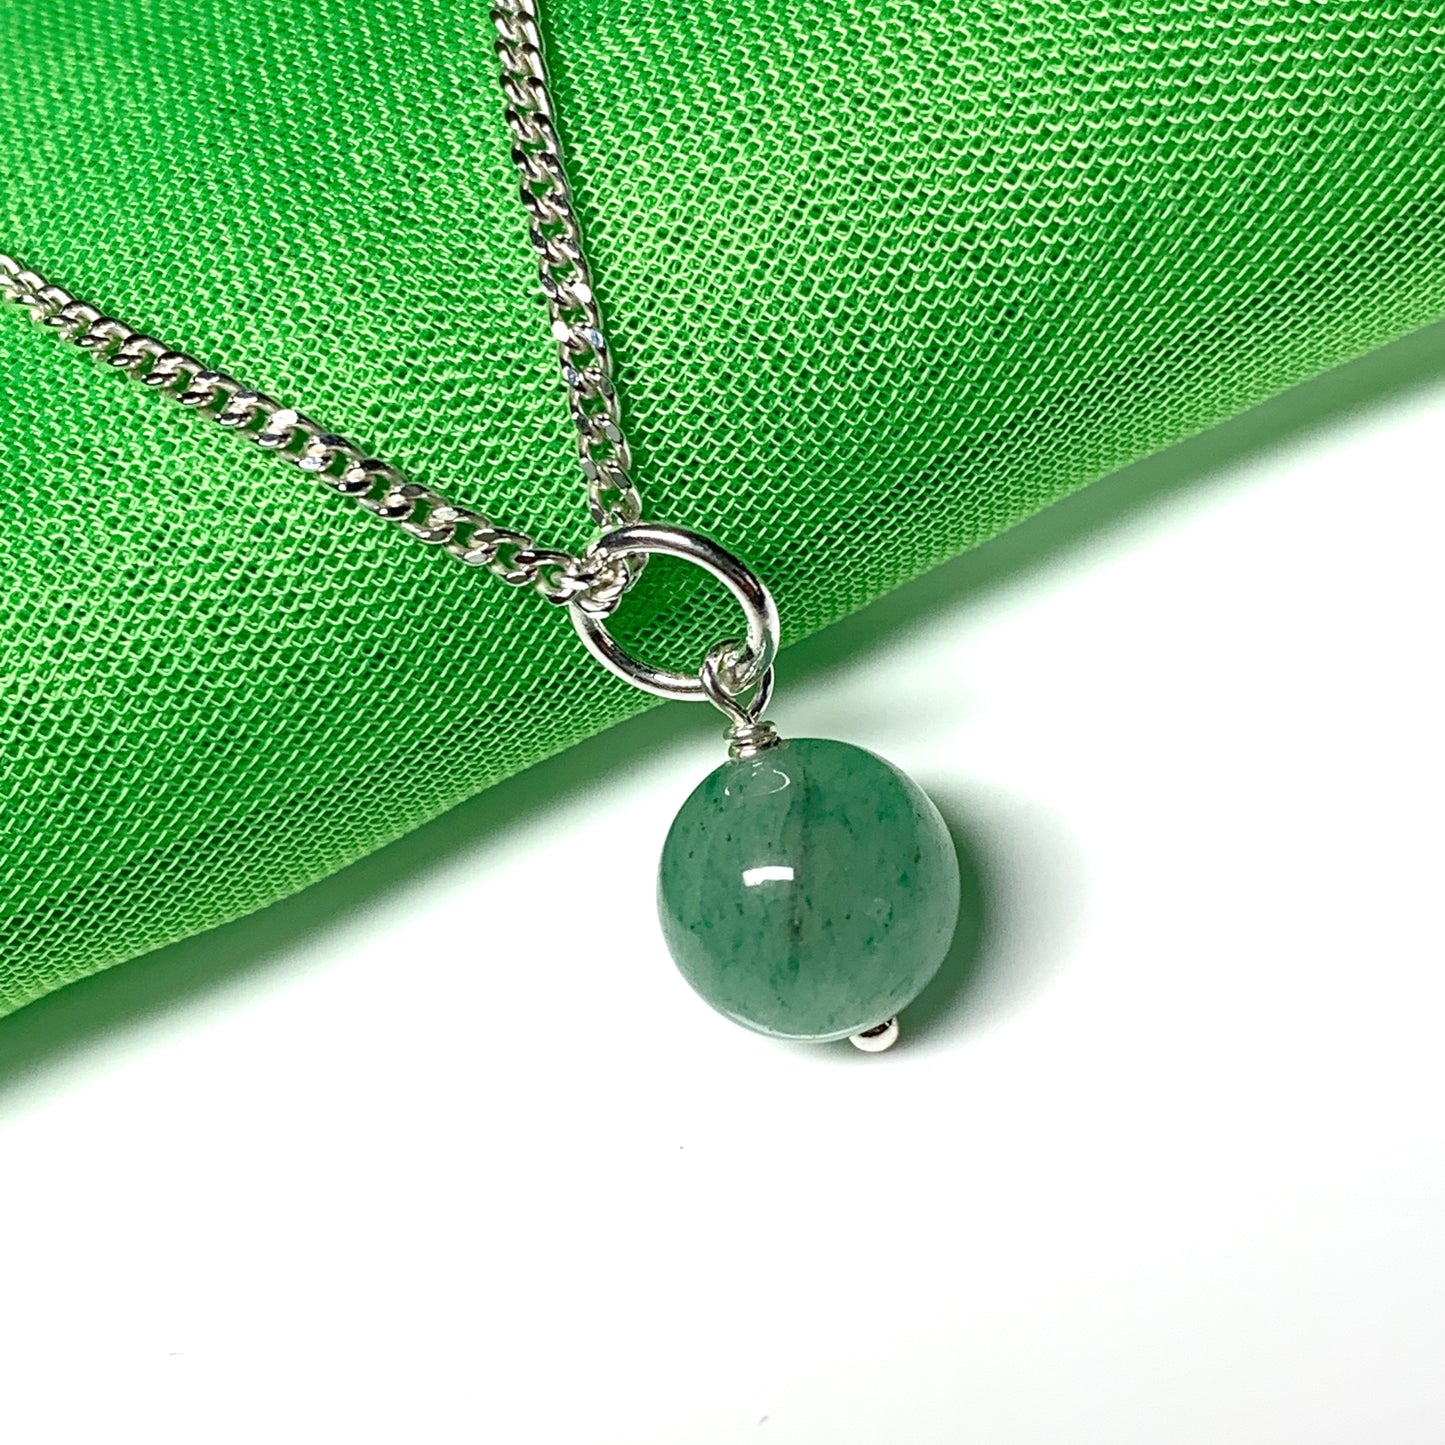 Jade necklace round ball shaped green pendant